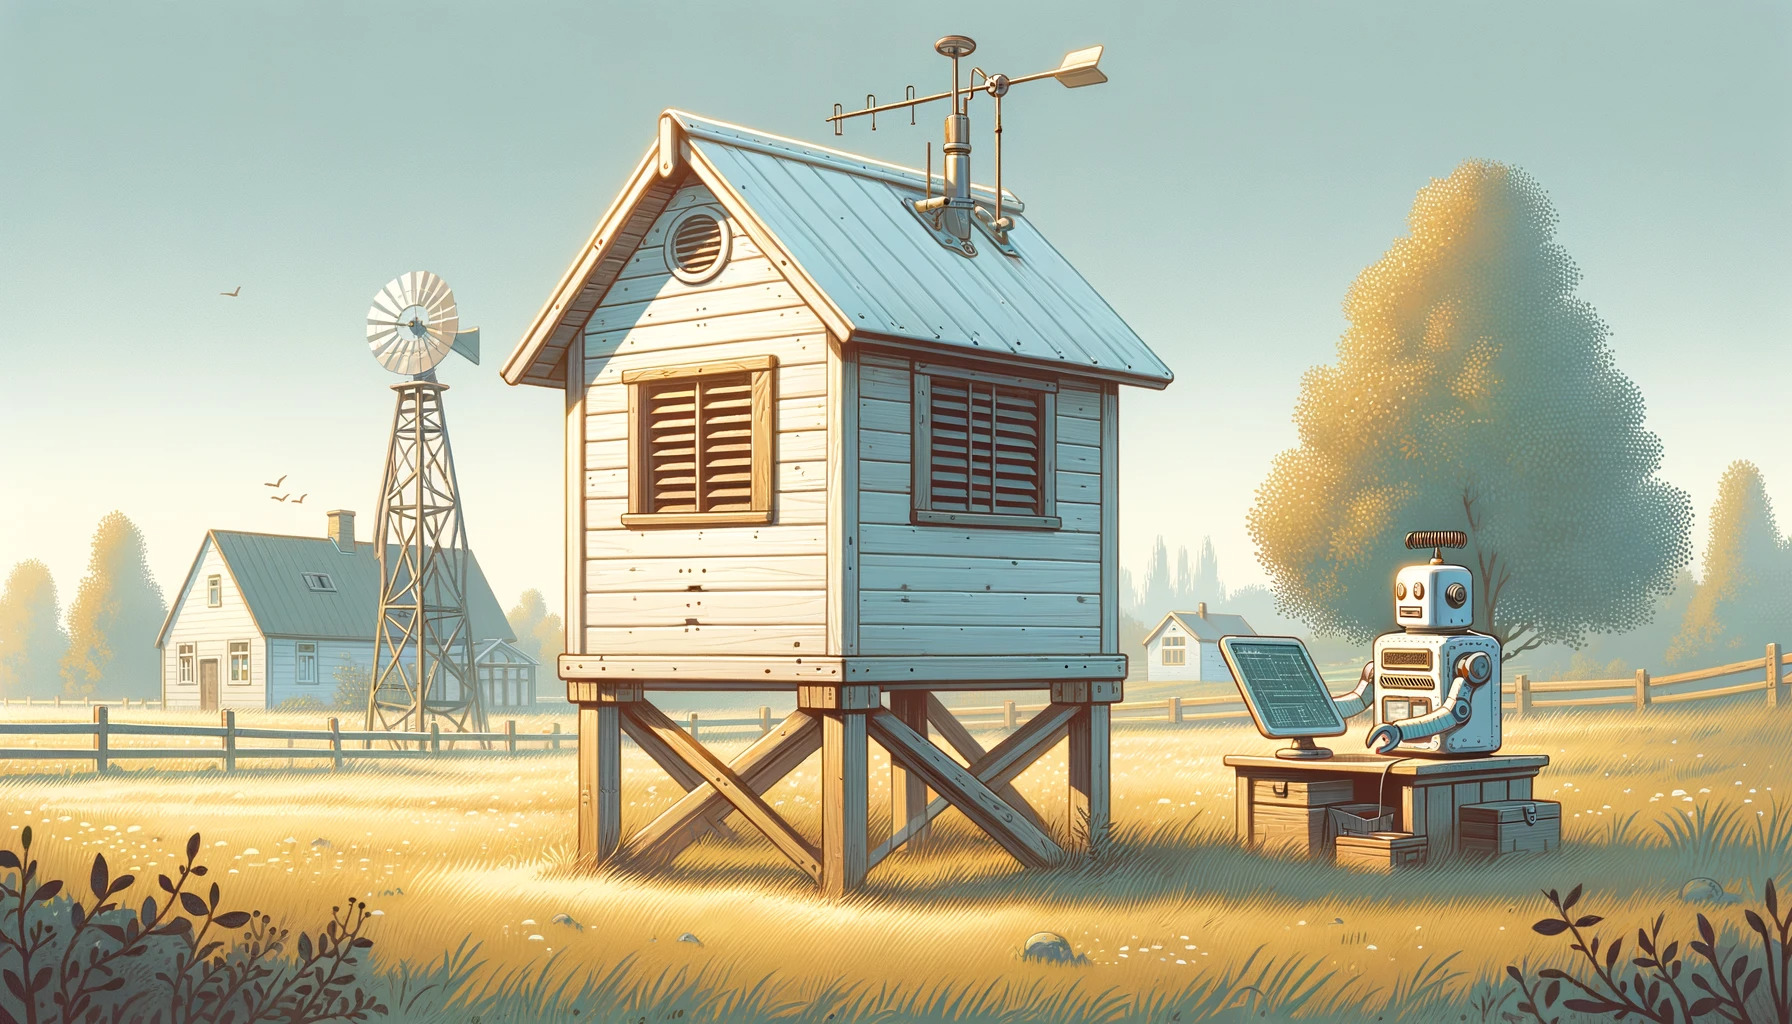 In a rural setting, a soft touched flat illustration portrays a small white wooden meteorological station with vented sides, standing on wooden supports. The station is set in a grassy garden close to a countryside home. An antique robot is occupied with a task nearby.